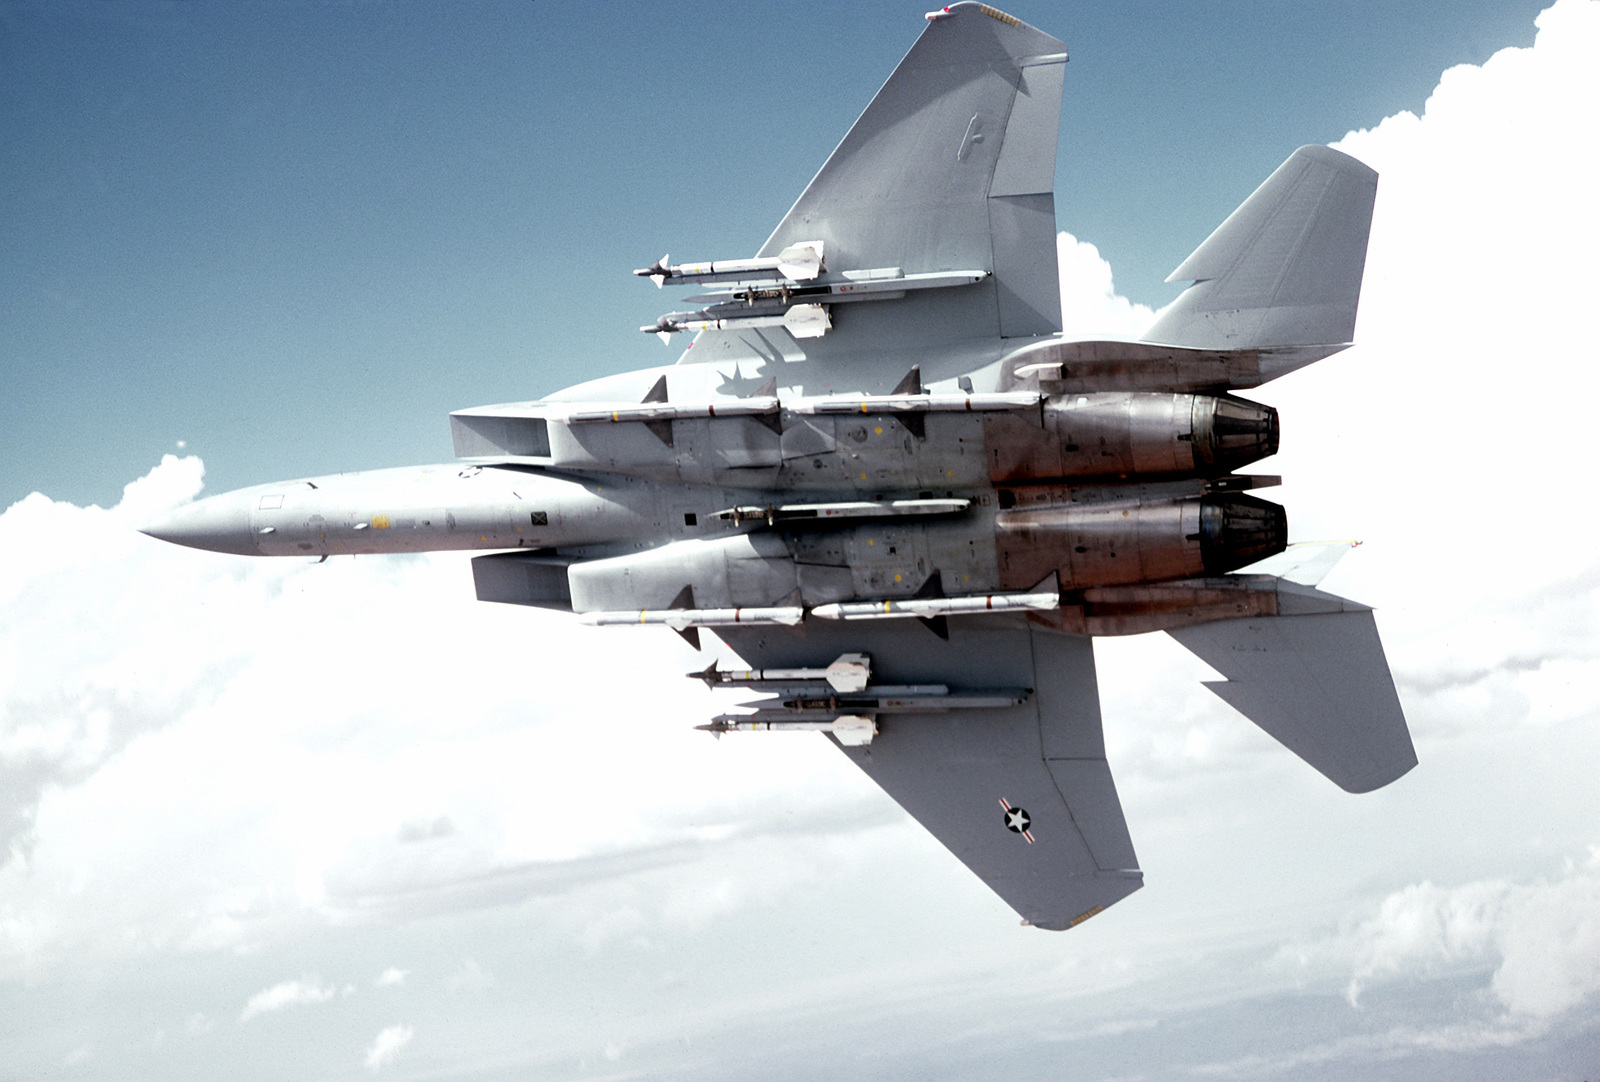 The F-15 is the most badass U.S. fighter jet ever